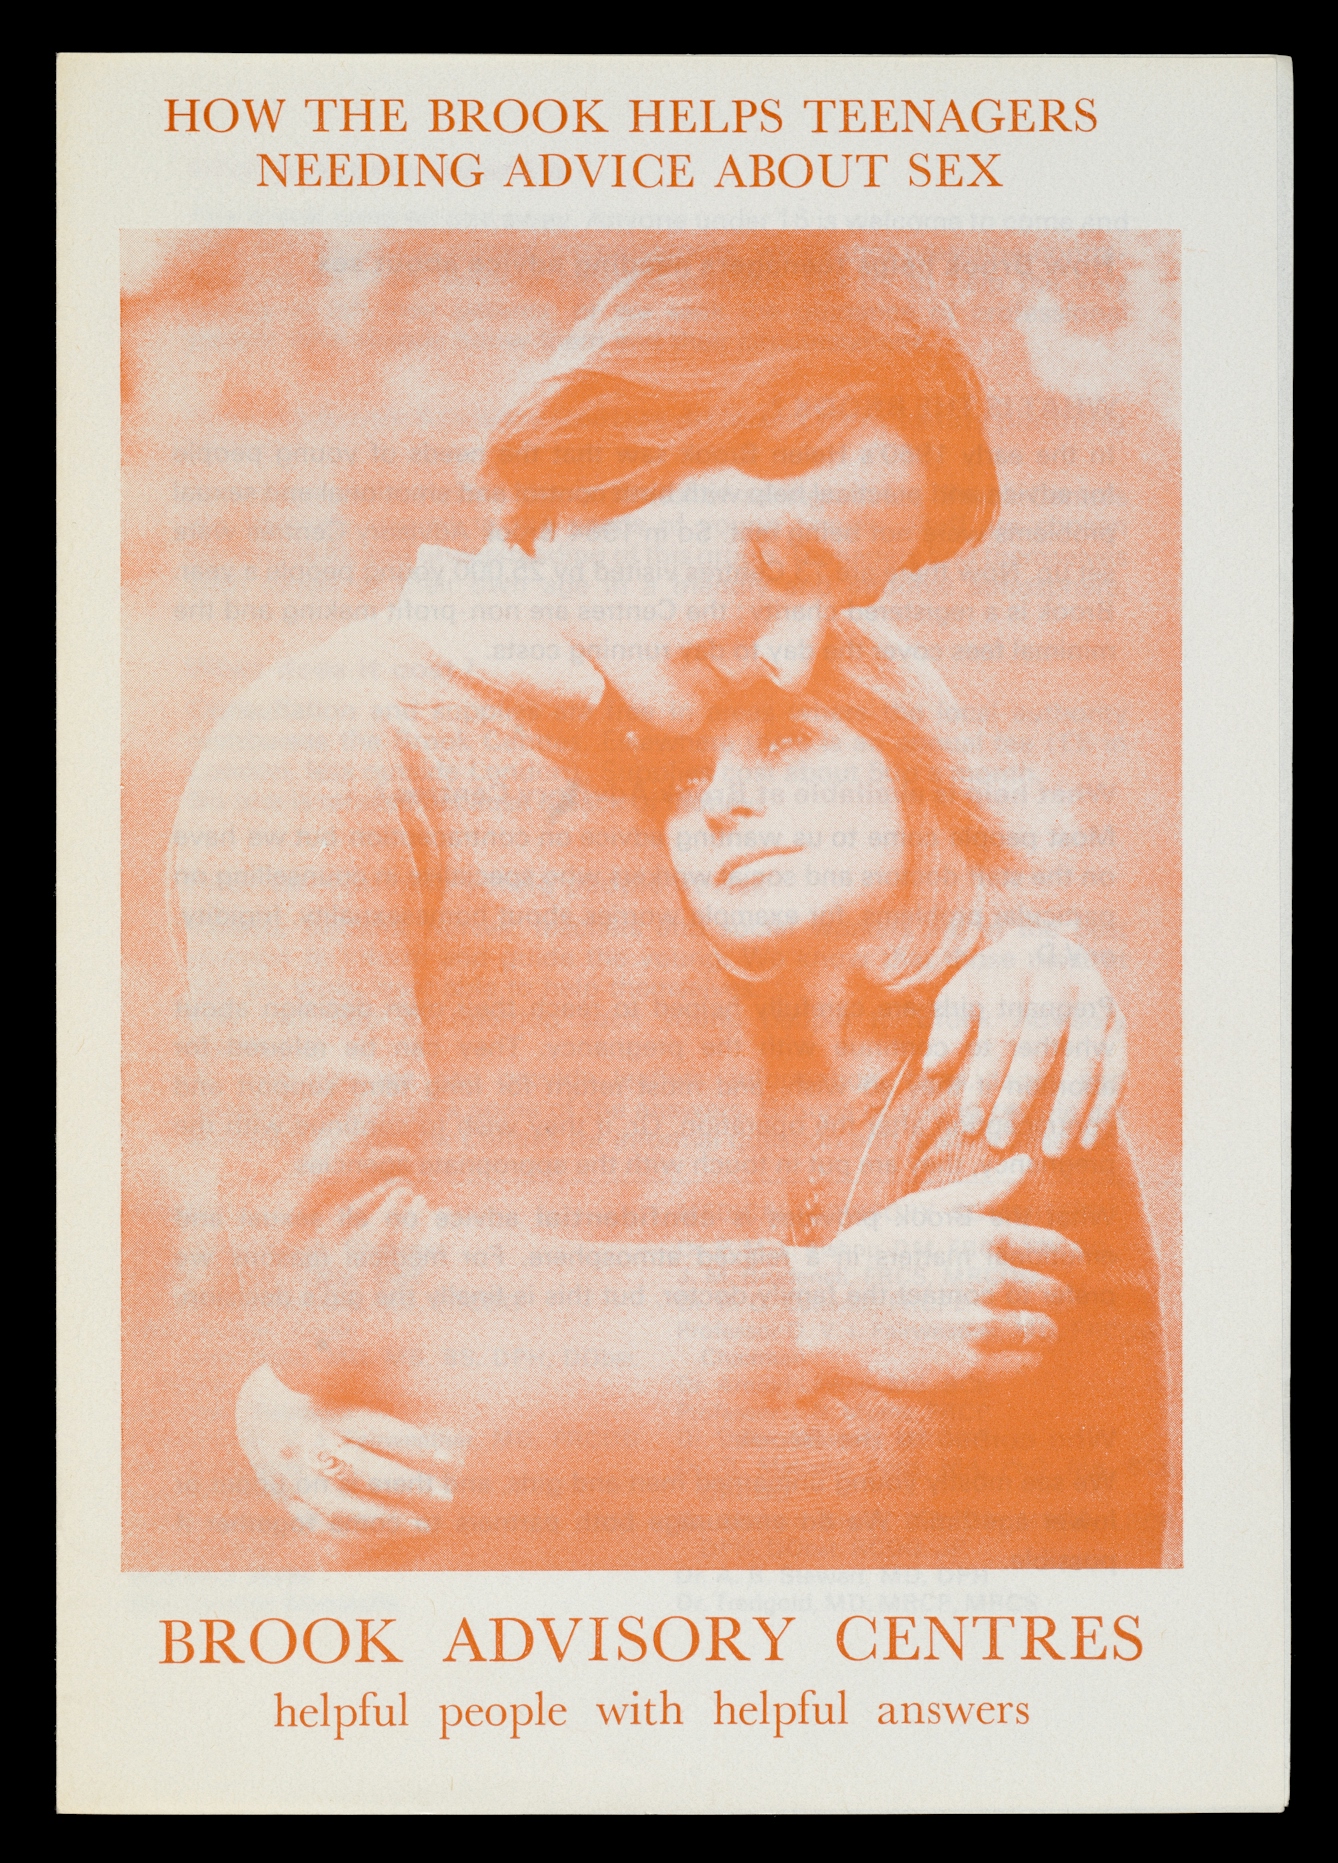 Photograph of archive material from the 1980s against a black background. The image shows an A5 sized leaflet with a large orange tinted photograph on the front of a young man and woman in an embrace. Above and below the image are the words, 'How the Brook helps teenagers needing advice about sex. Brook Advisory Centres, helpful people with helpful answers'.